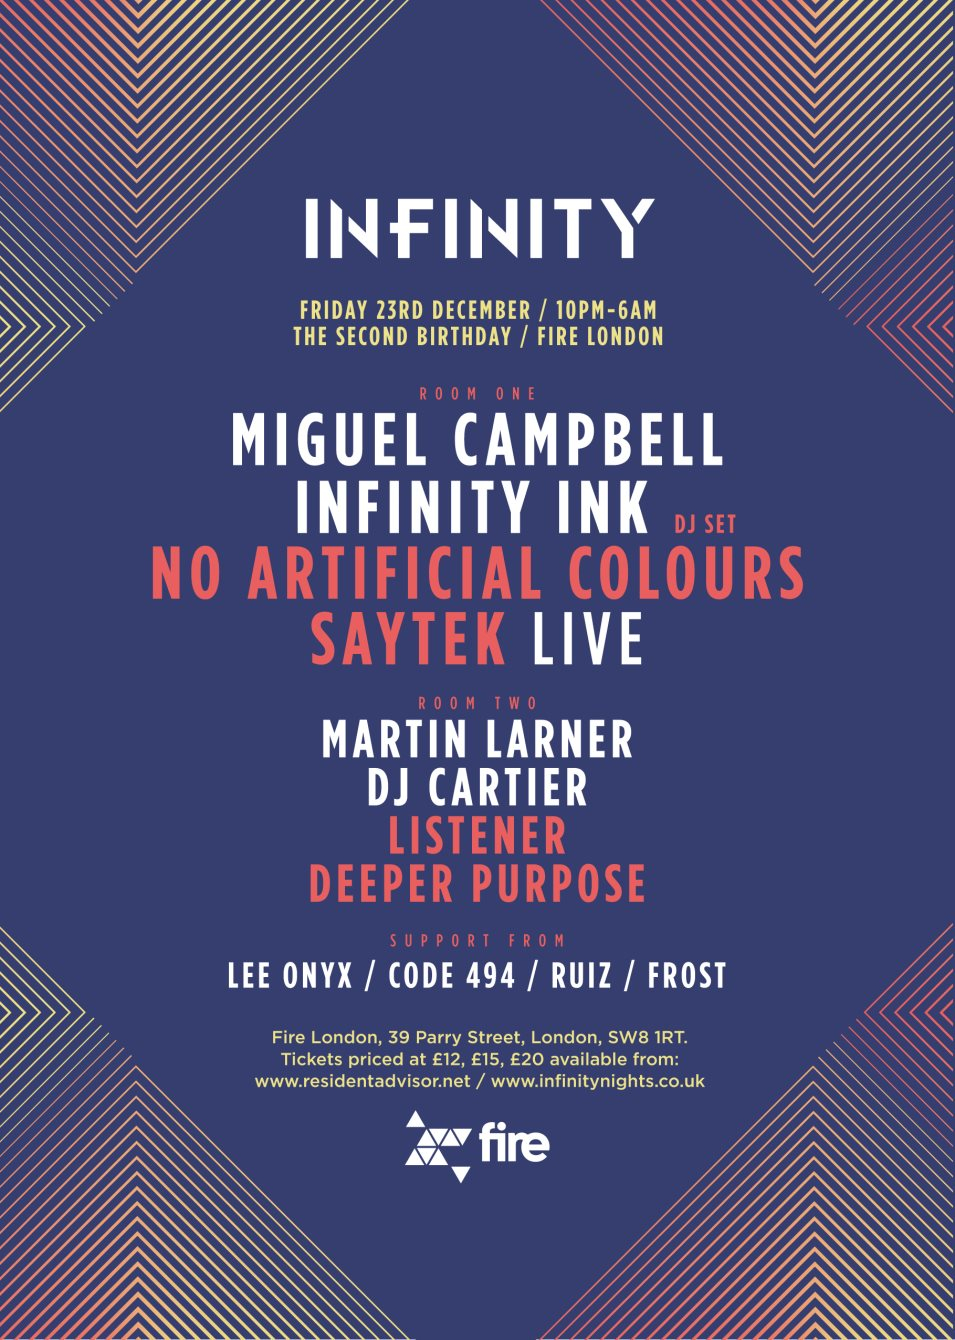 Infinity 2nd Birthday: Miguel Campbell + Infinity Ink + No Artificial Colours + Saytek - Flyer front